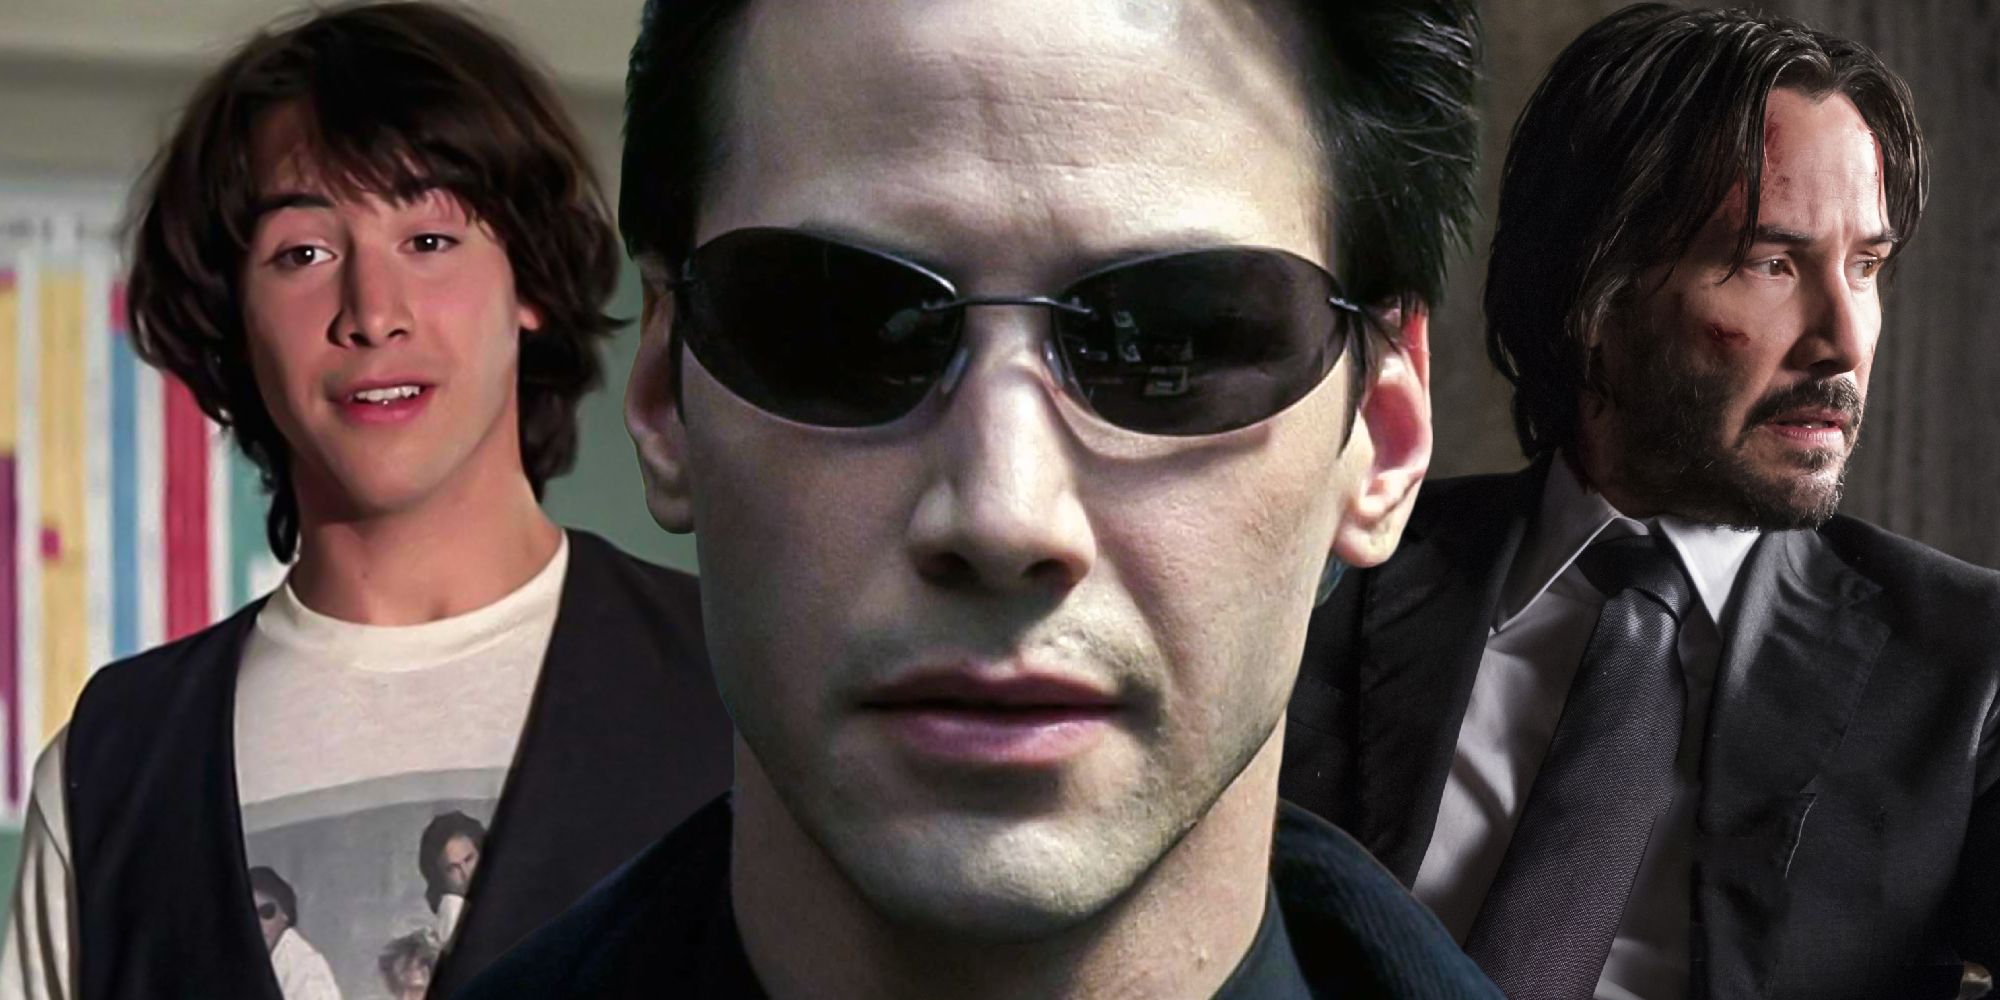 Every Keanu Reeves Movie Ranked From Worst to Best - Oxtero